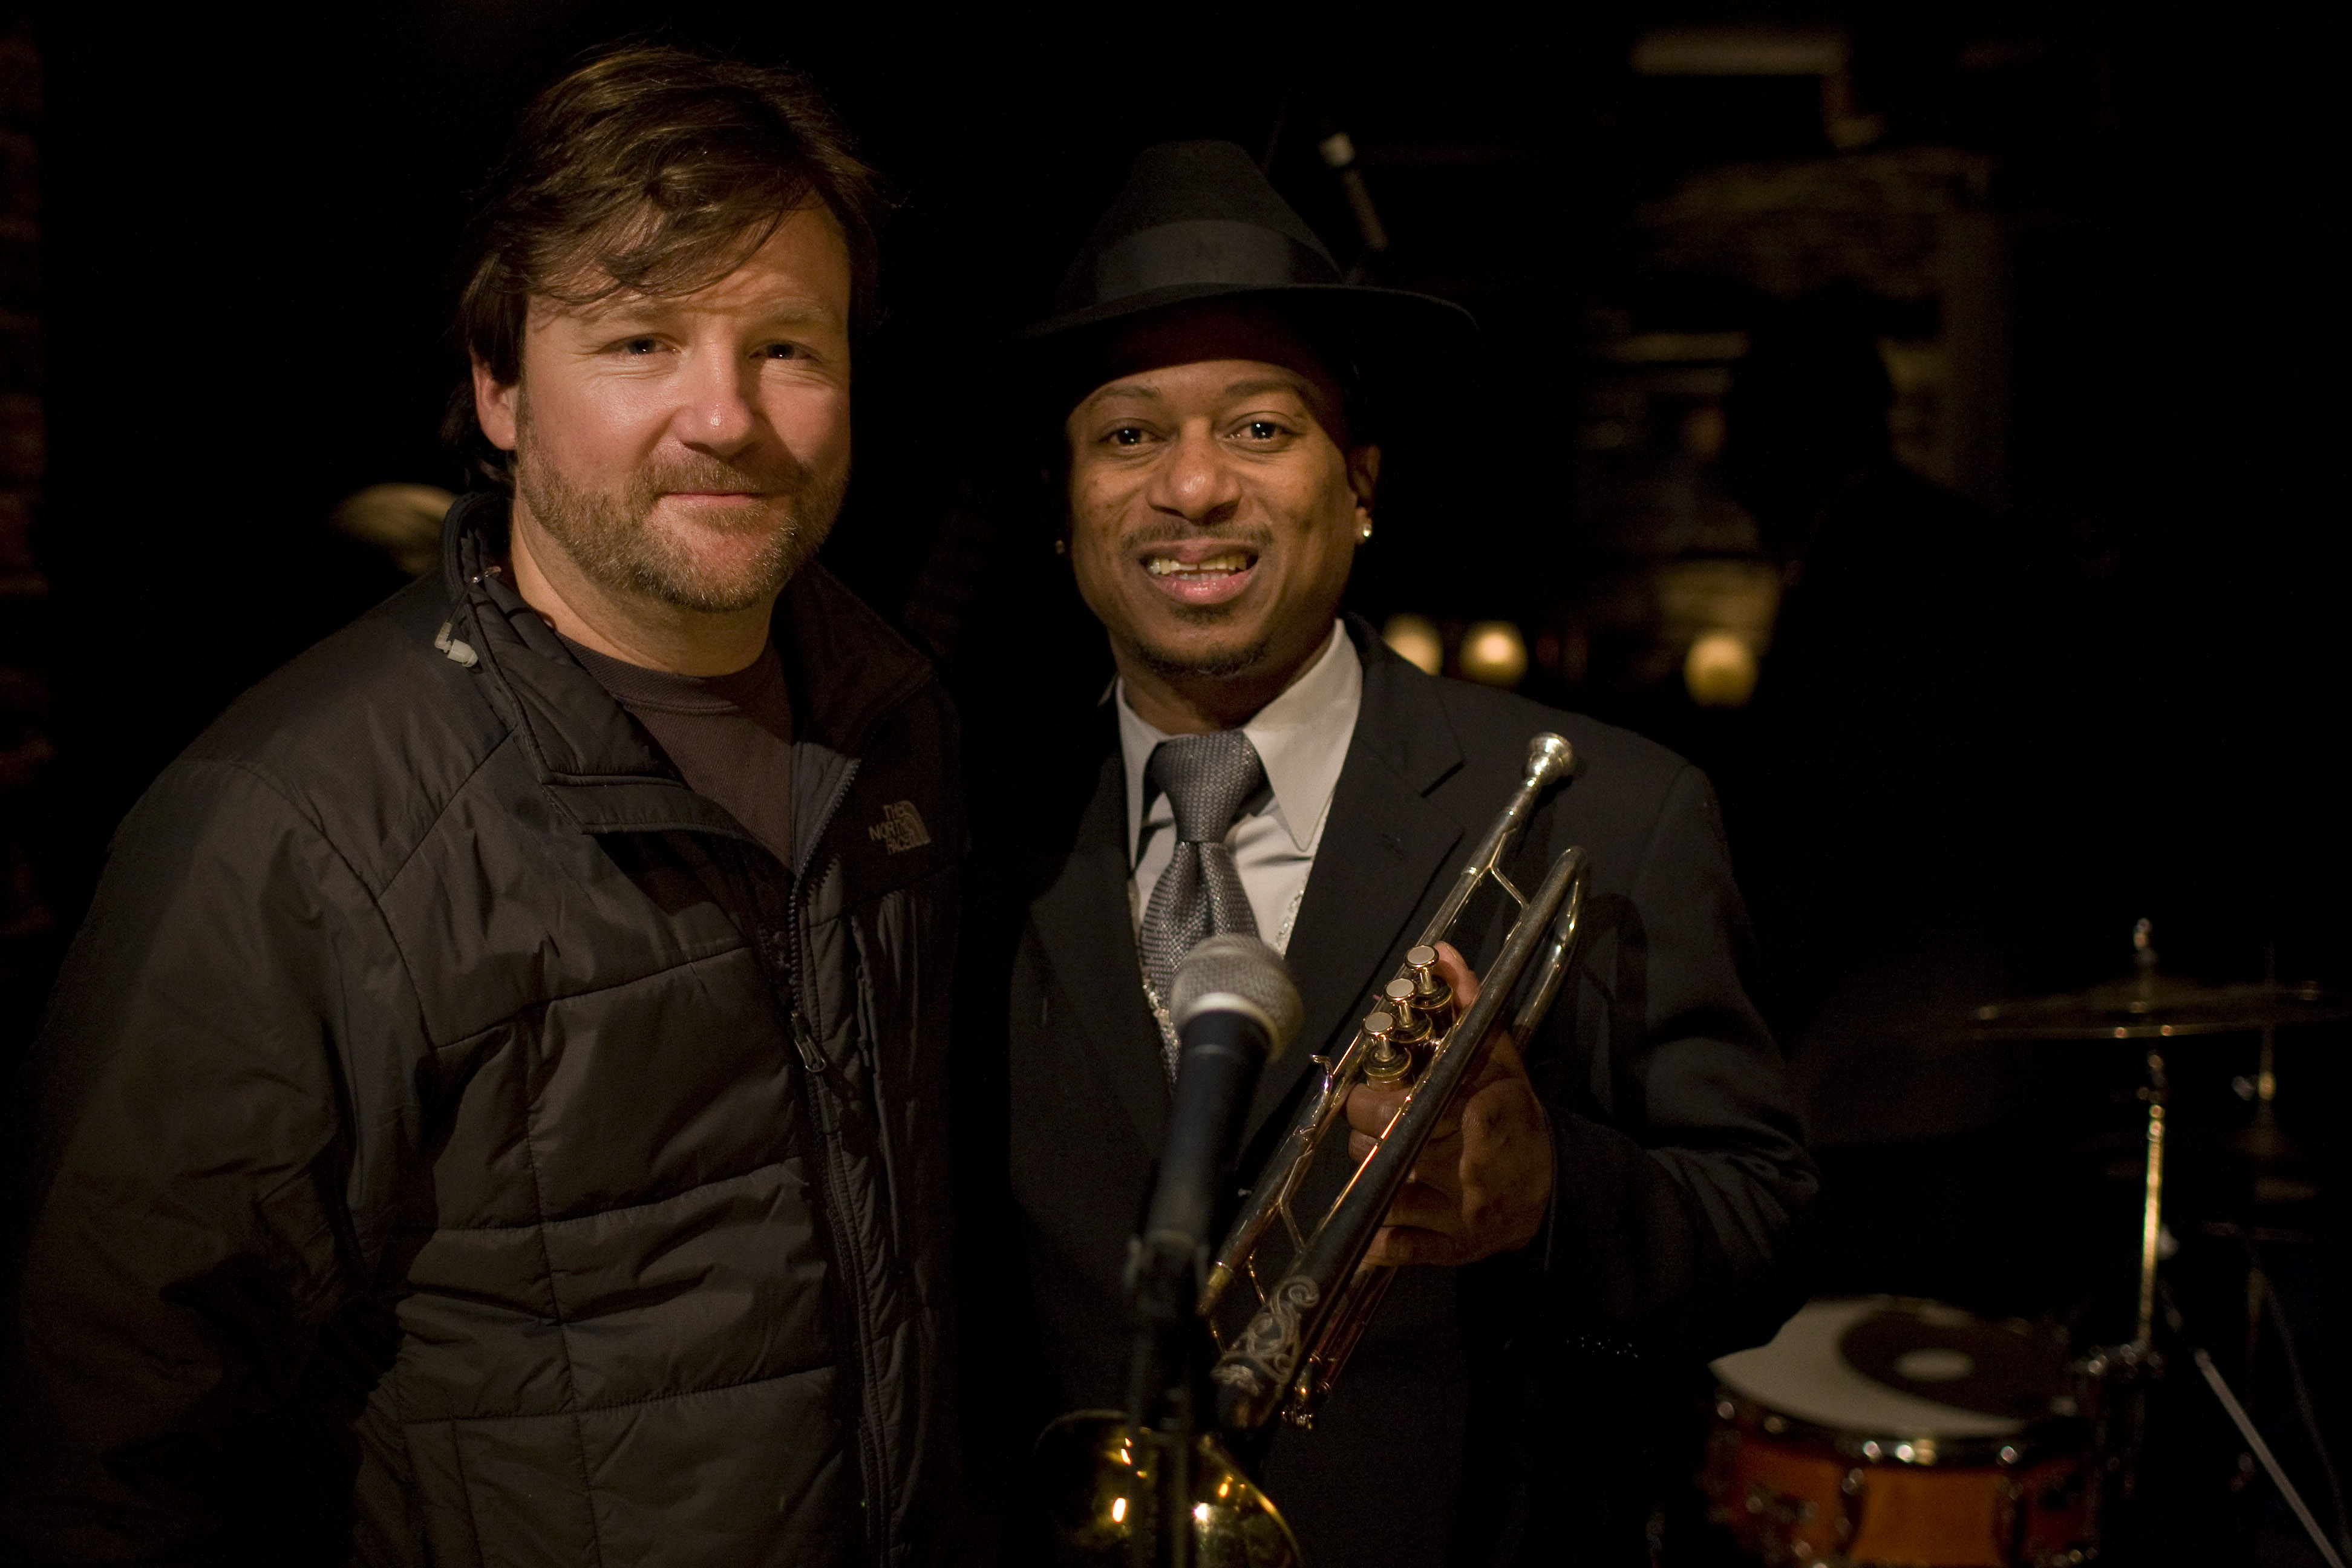 On the set of SO UNDERCOVER, with the great Kermit Ruffins